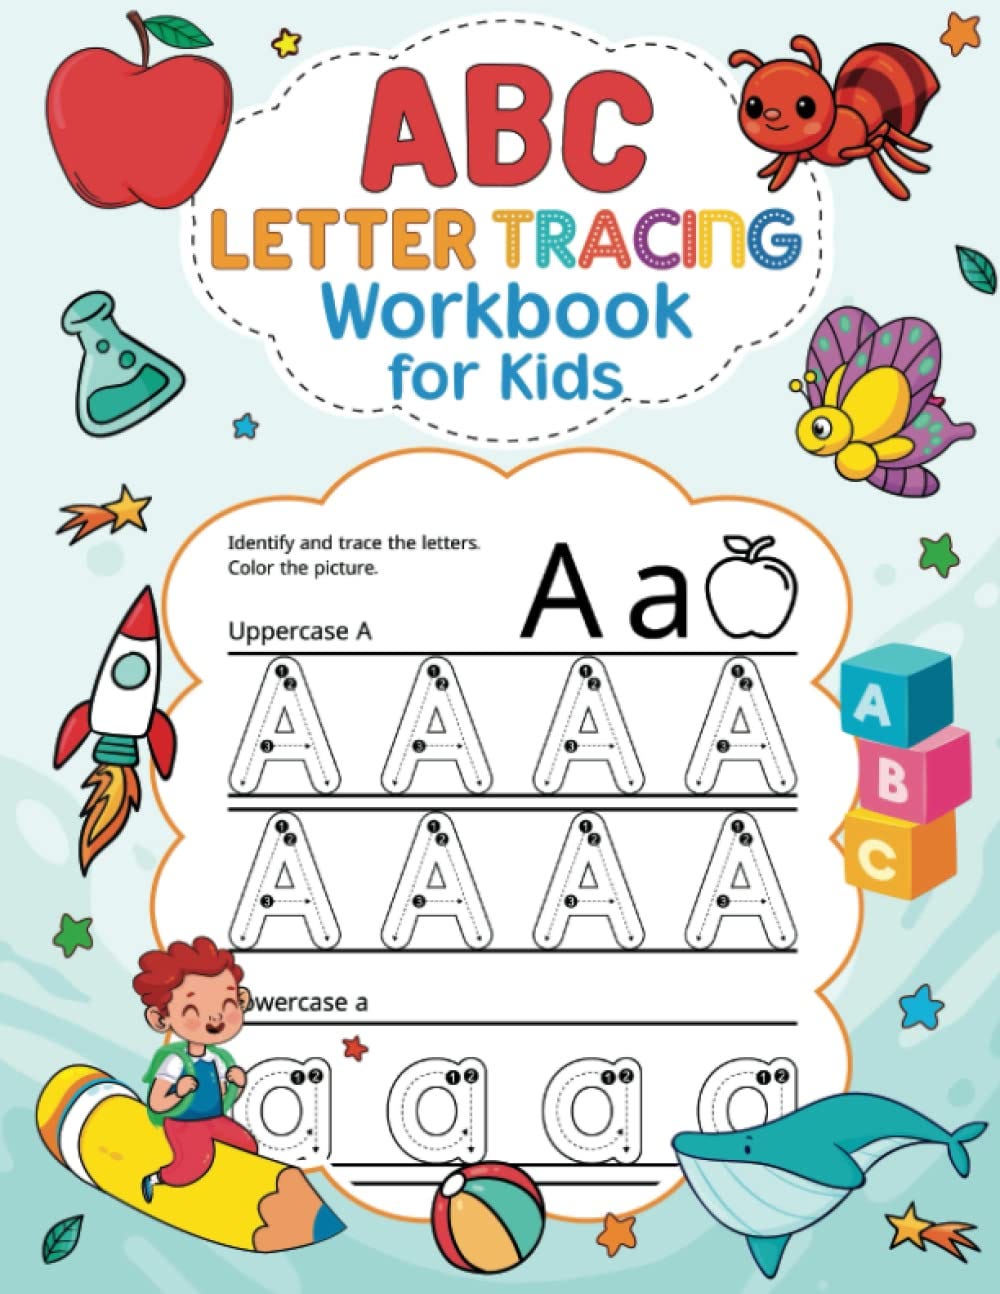 Handwriting practice book for kids: Letter tracing workbook for